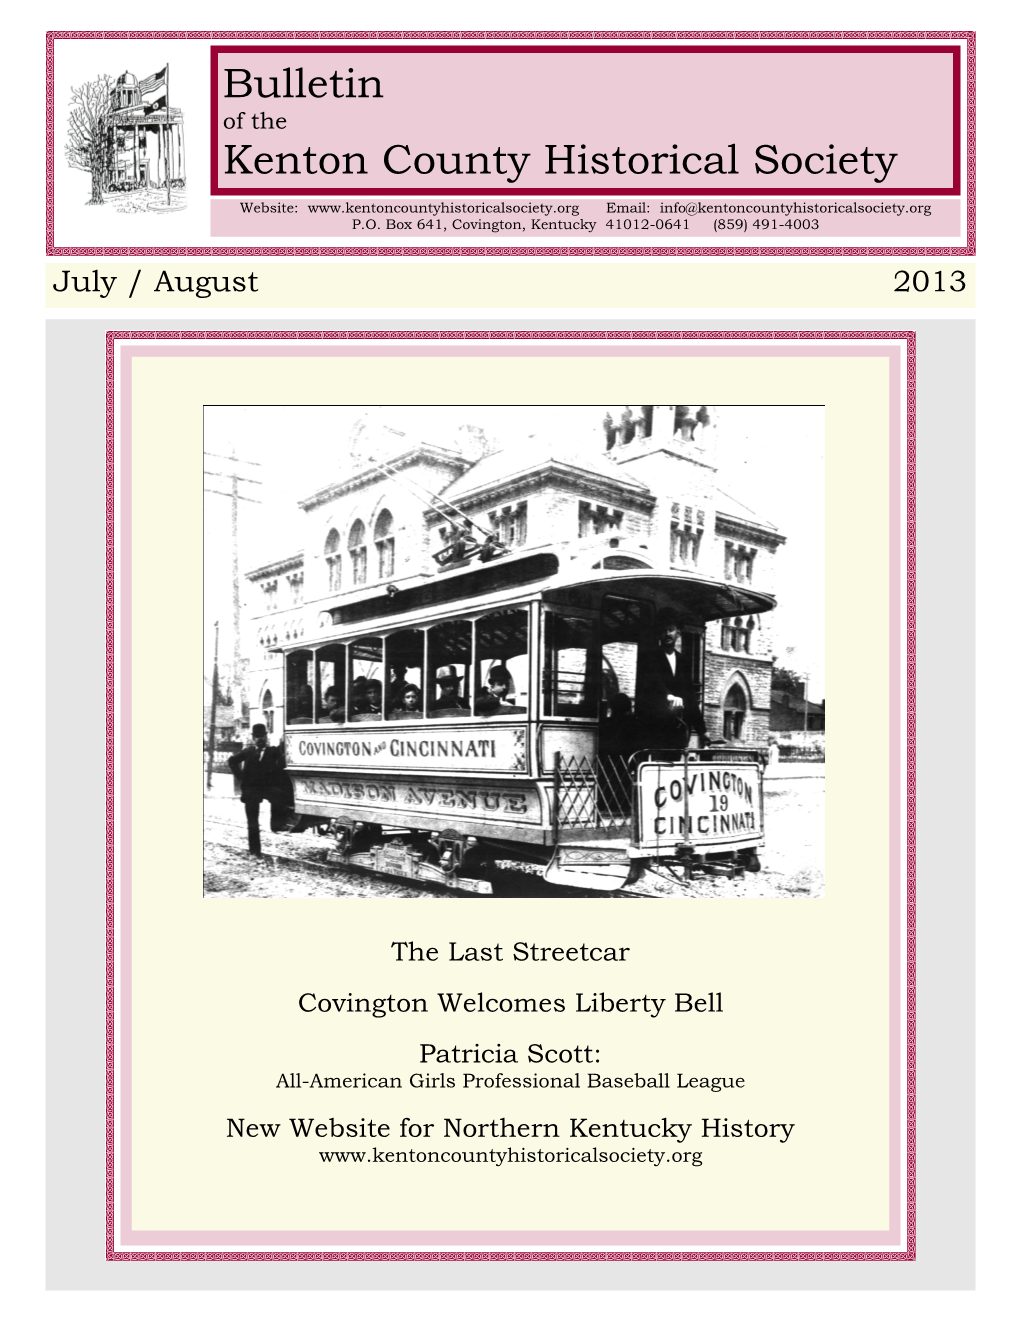 New Website for Northern Kentucky History the Last Streetcar